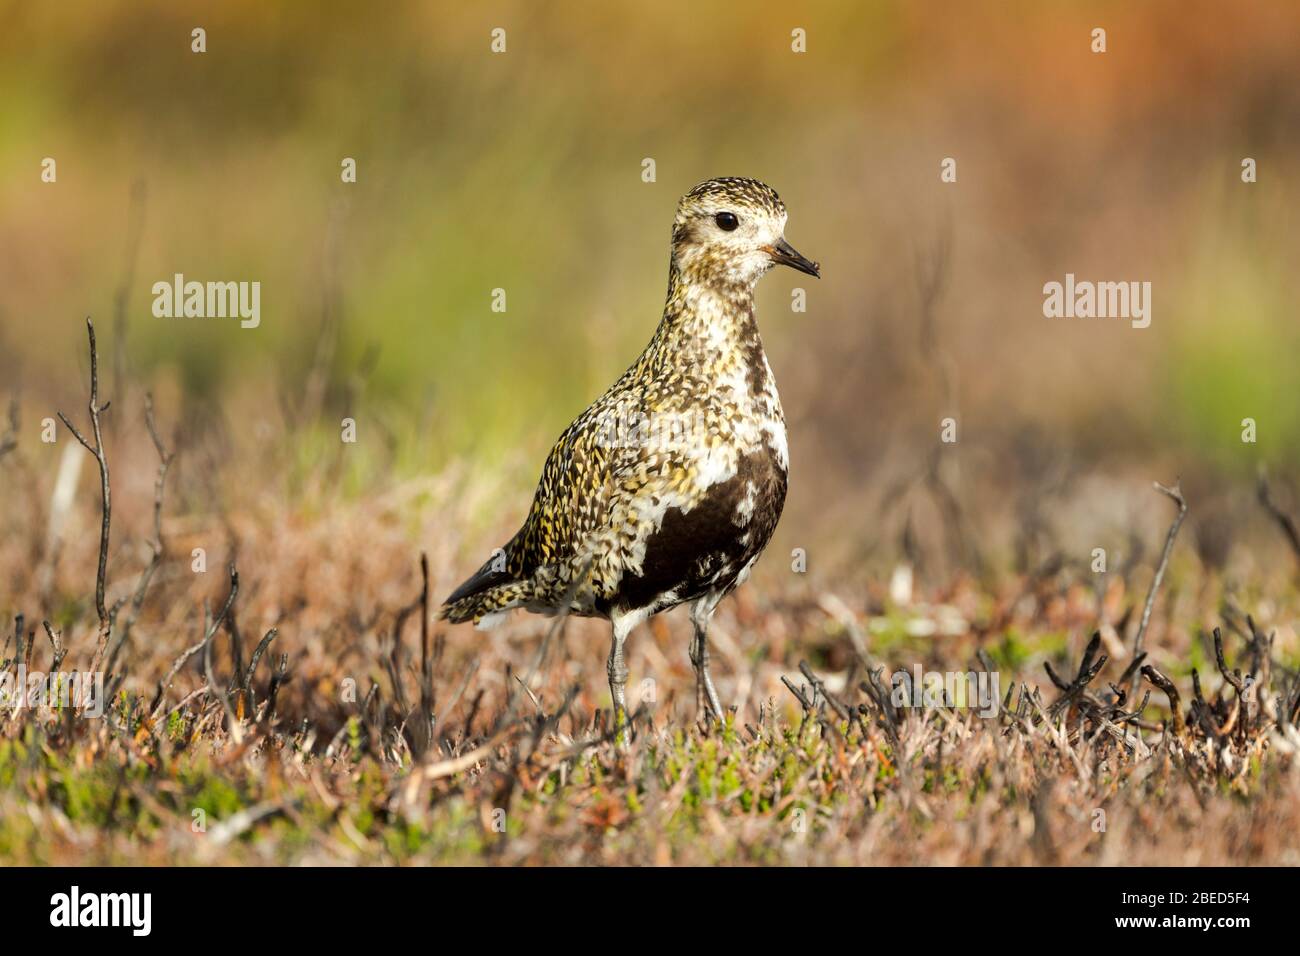 Golden Plover female (Pluvialis apricaria) standing on moorland vegetation in warm light Stock Photo